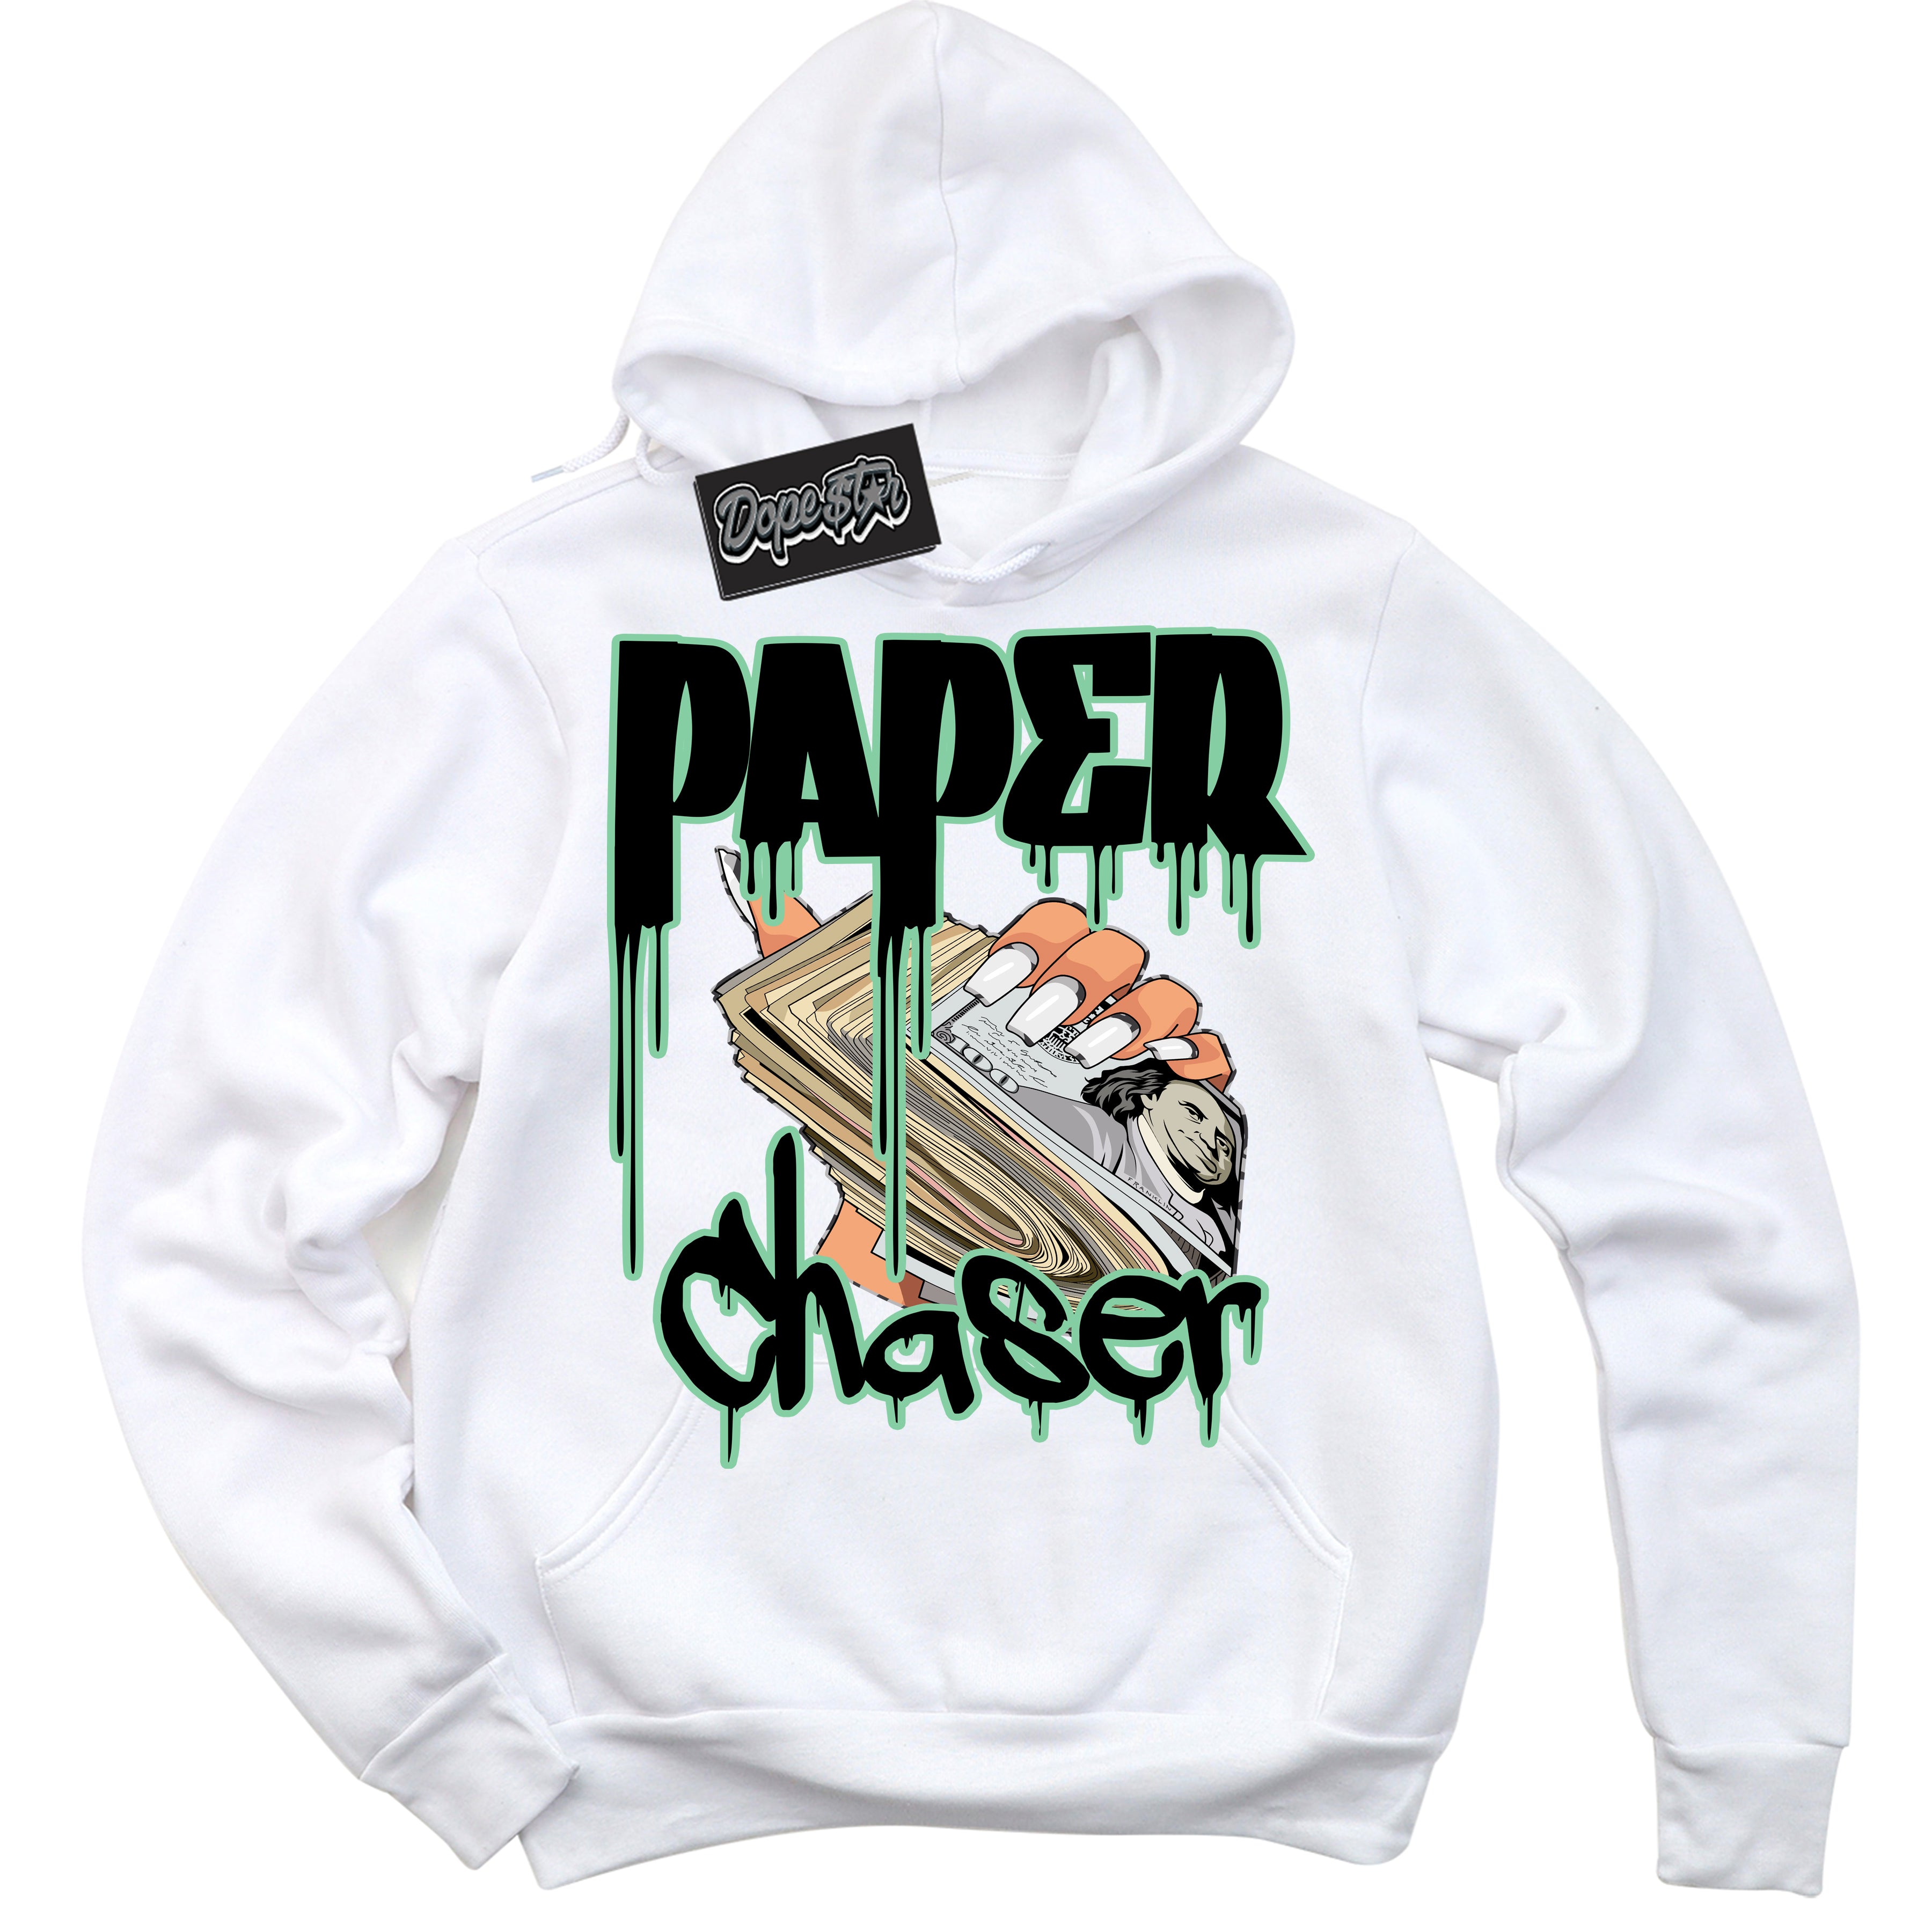 Cool White Graphic DopeStar Hoodie with “ Paper Chaser “ print, that perfectly matches Green Glow 3s sneakers